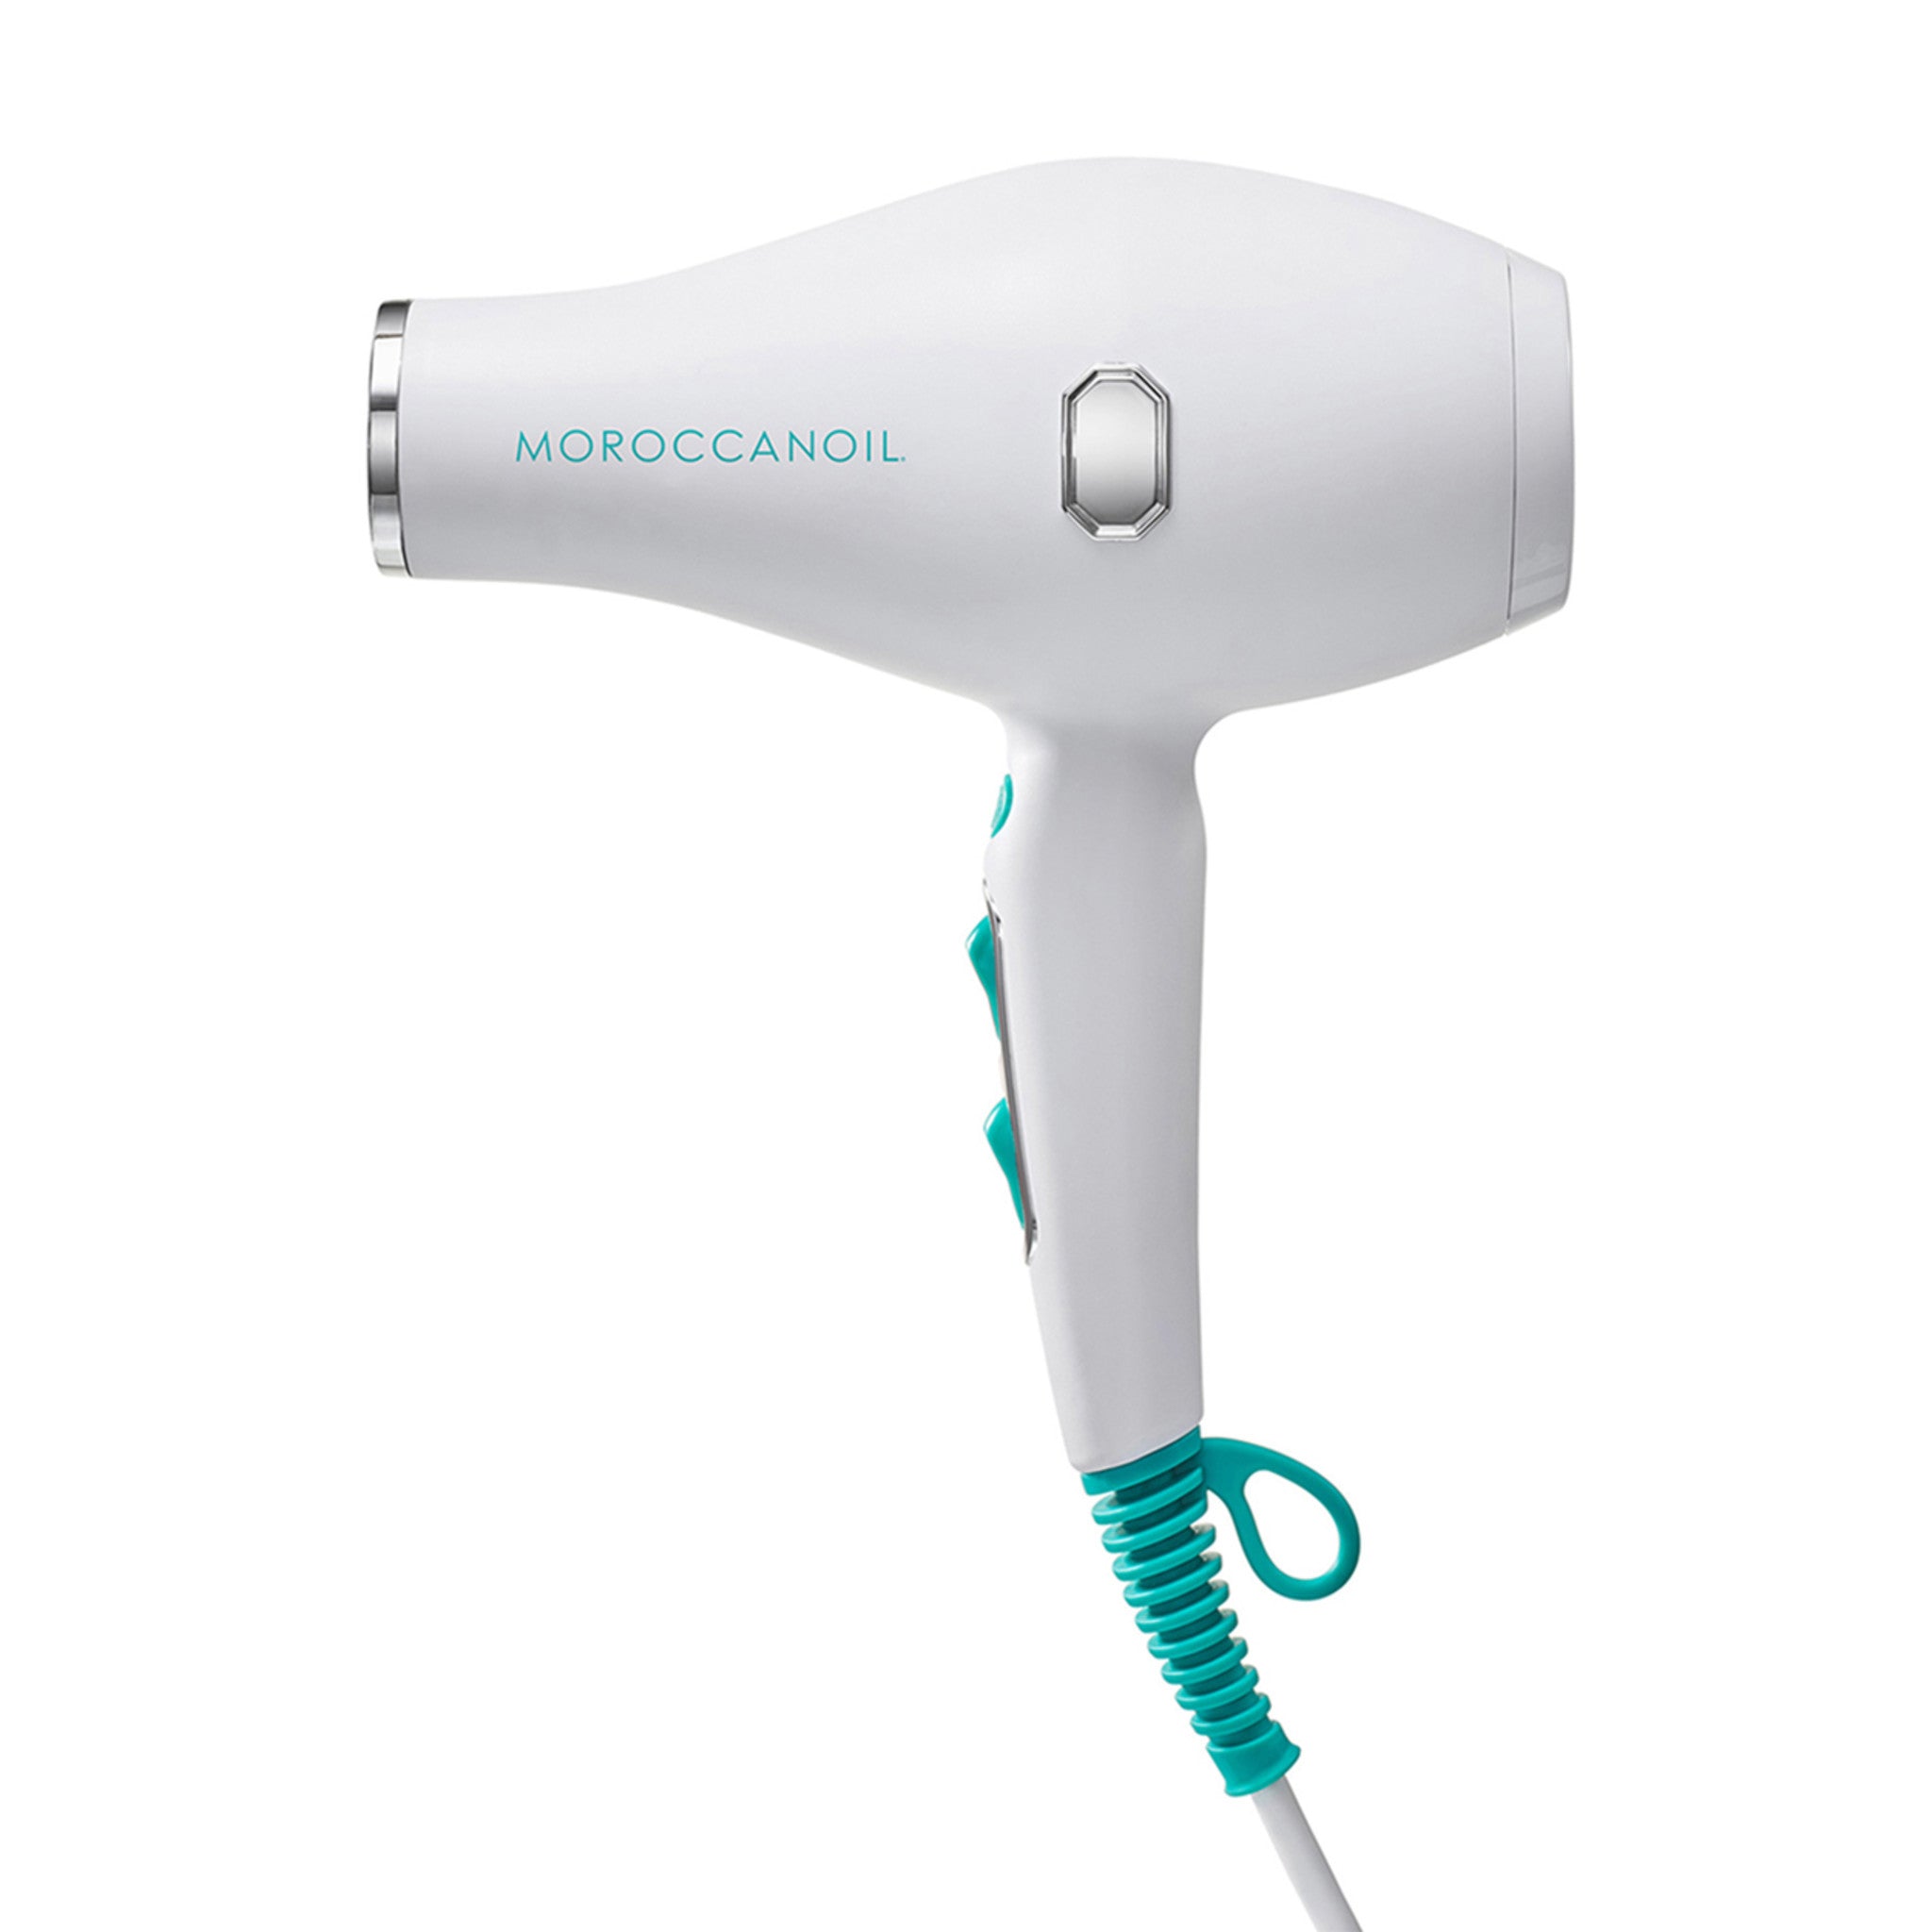 Moroccanoil Smart Styling Infrared Hair Dryer main image.